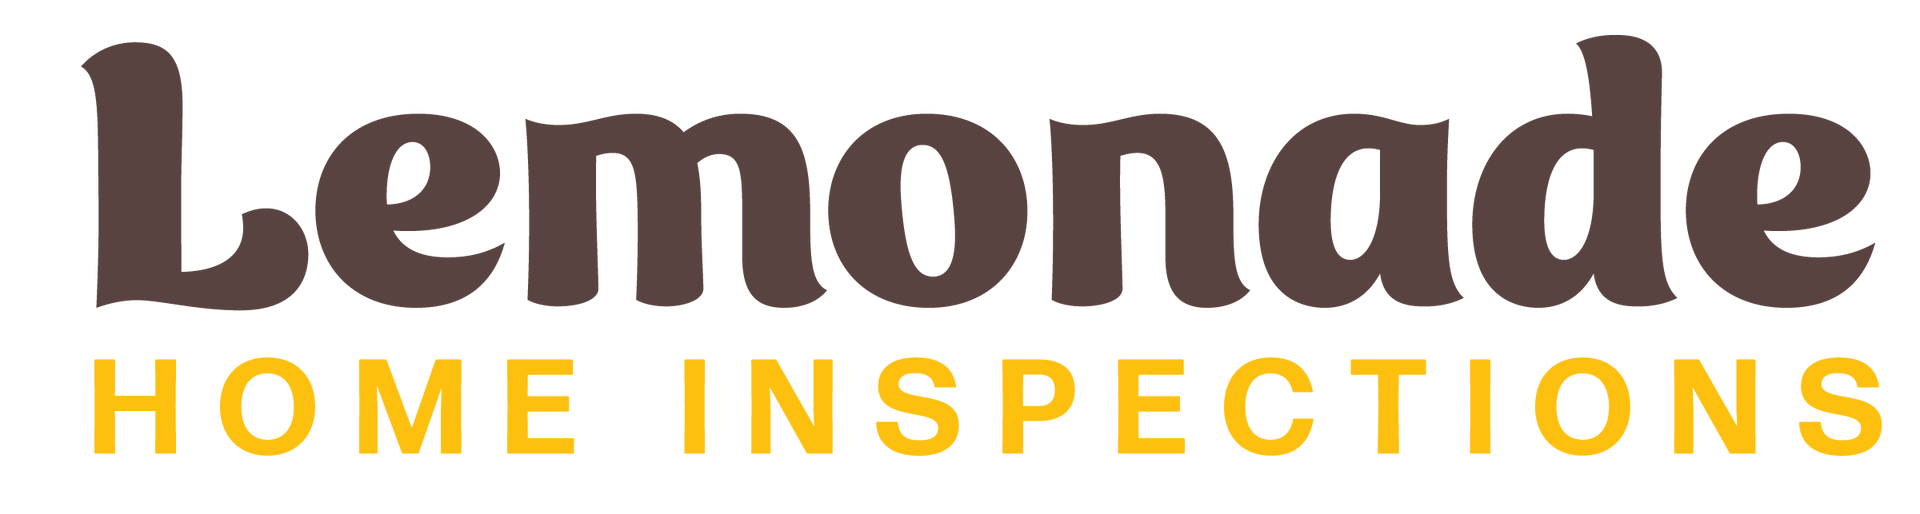 A logo for lemonade home inspections is shown